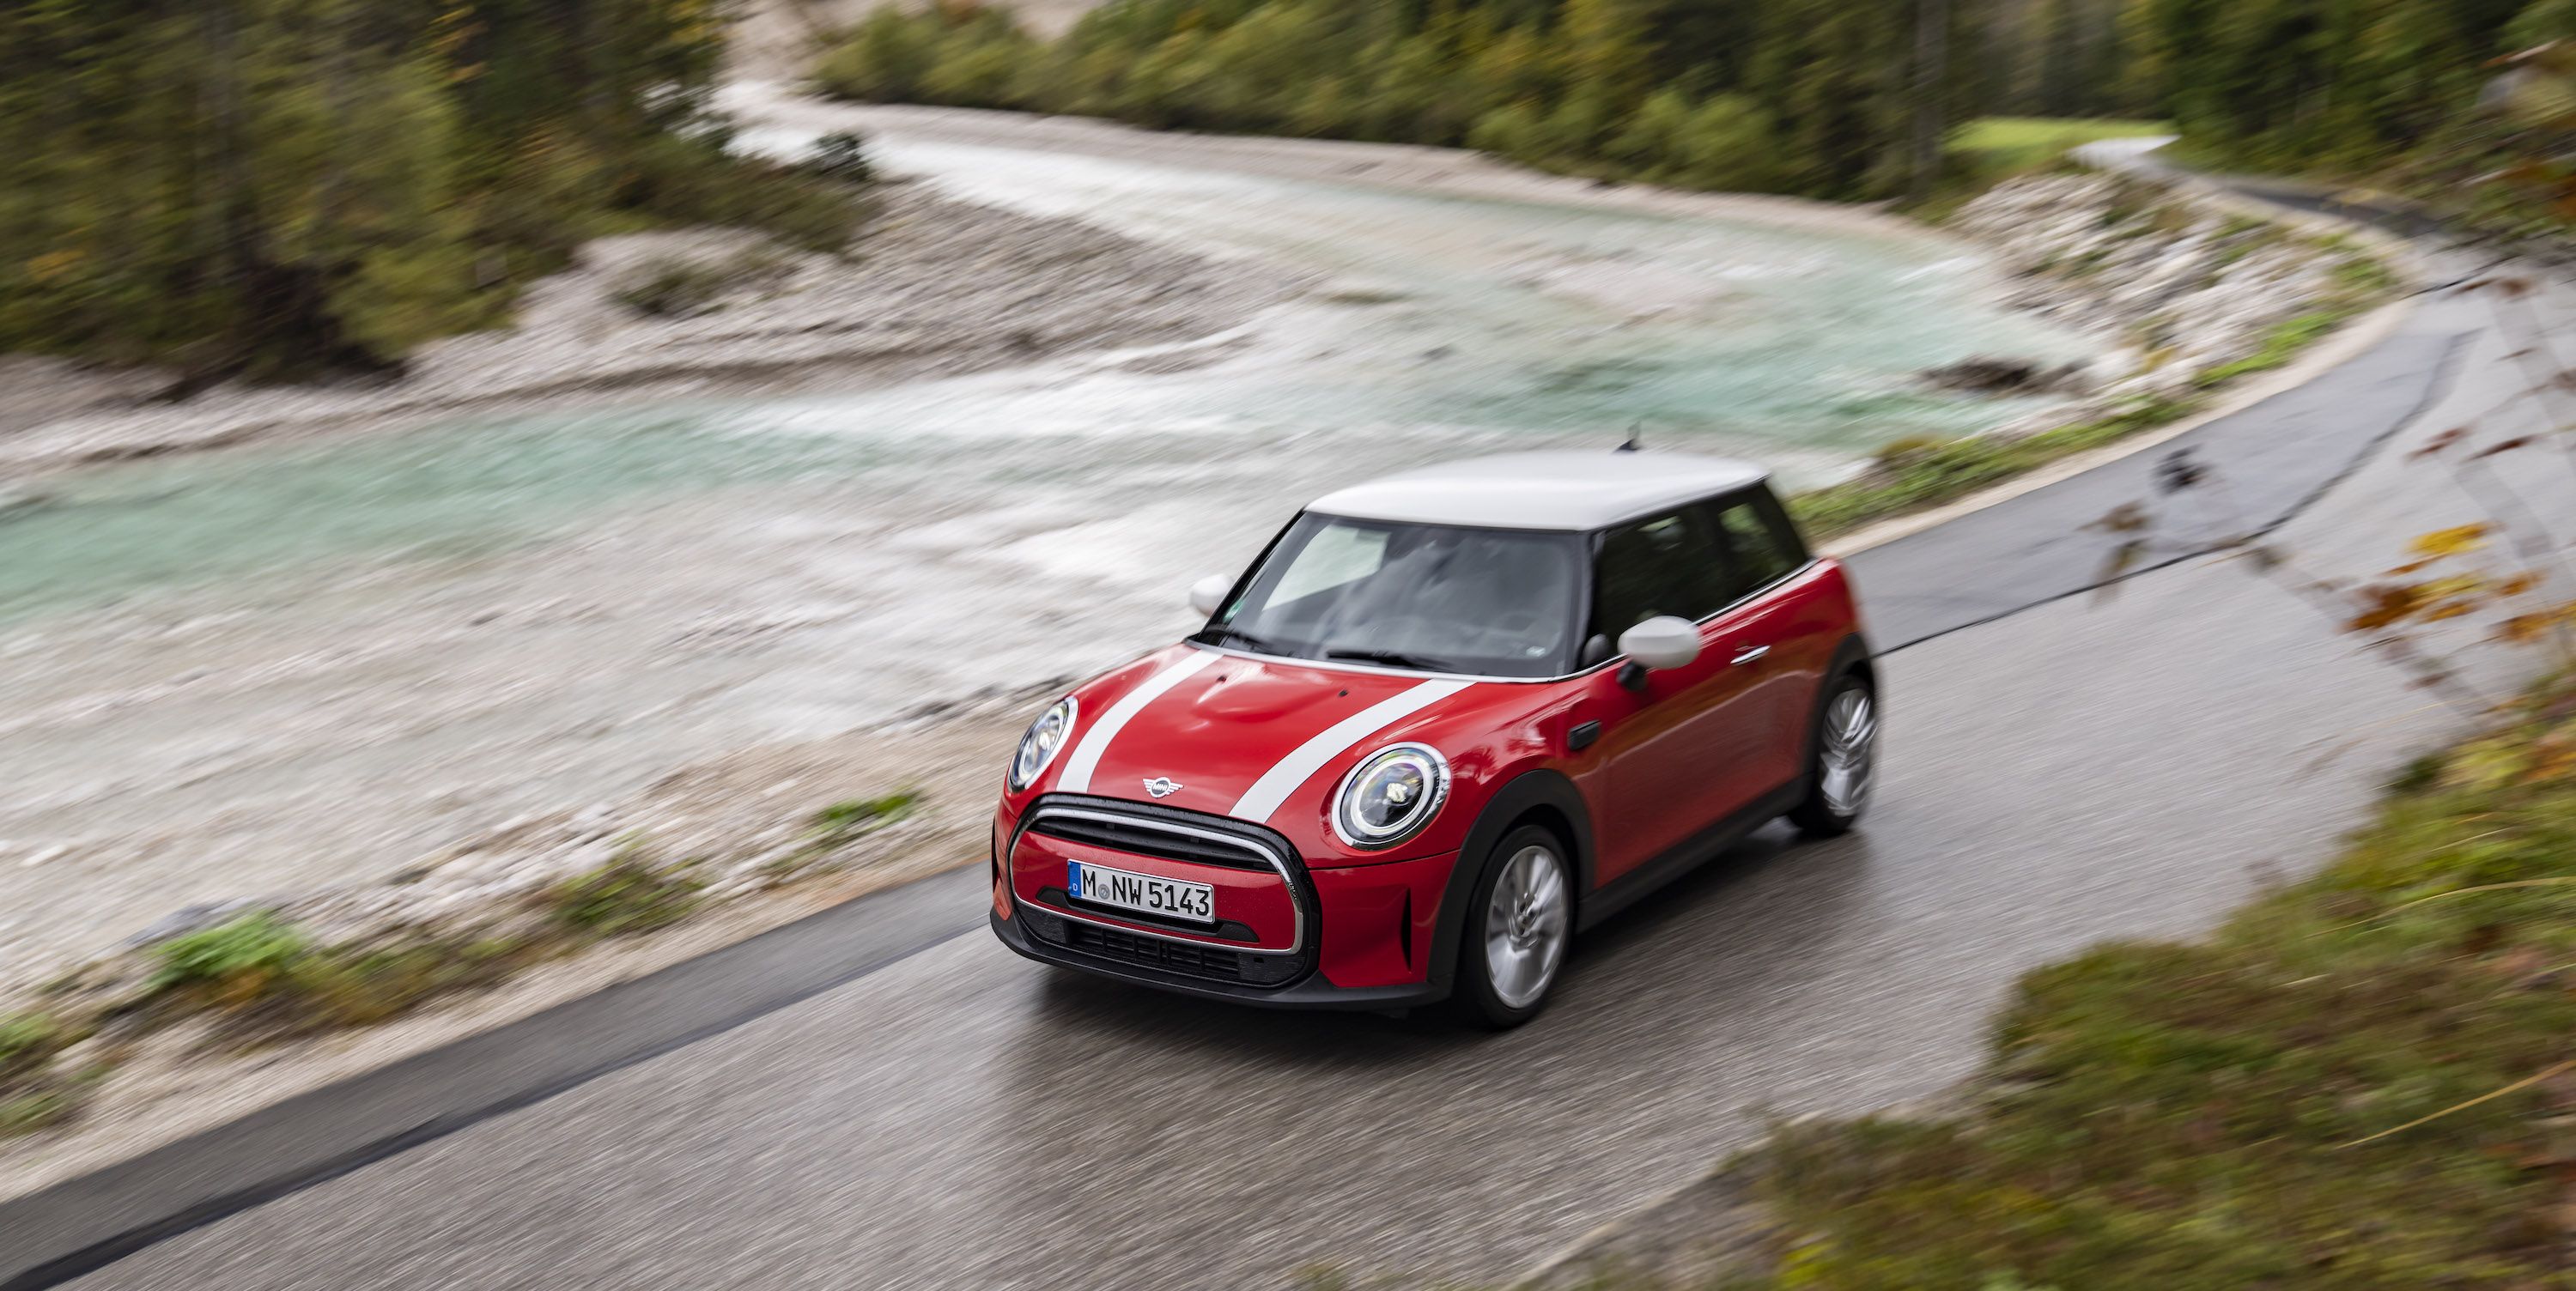 The Manual Mini Cooper Is No More, At Least For Now